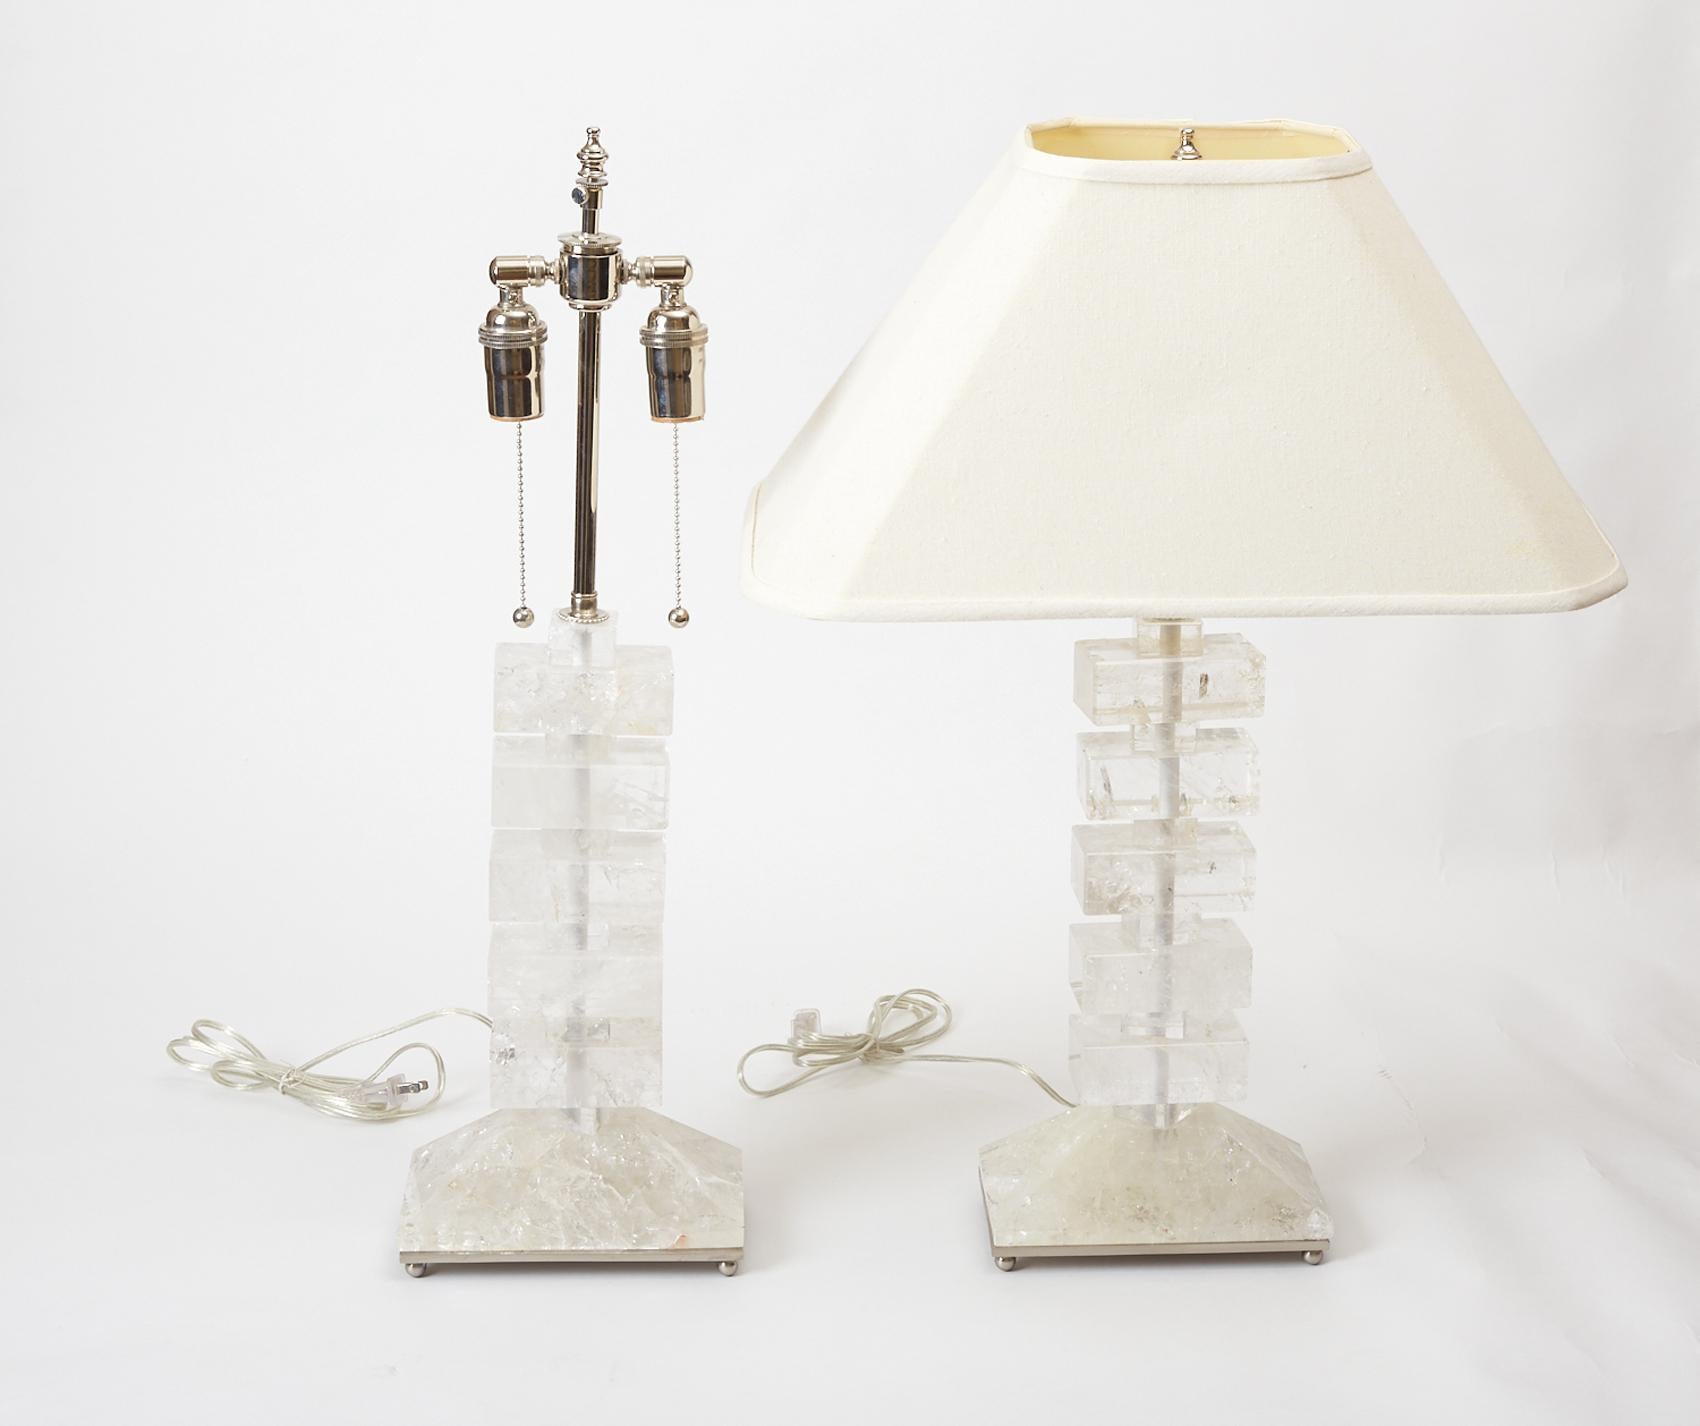 A pair of rock crystal table lamps with satin finish base. Wired for electricity, and fitted with two Edison sockets each. Recommended wattage: 60W, maximum wattage per socket: 100W.
    